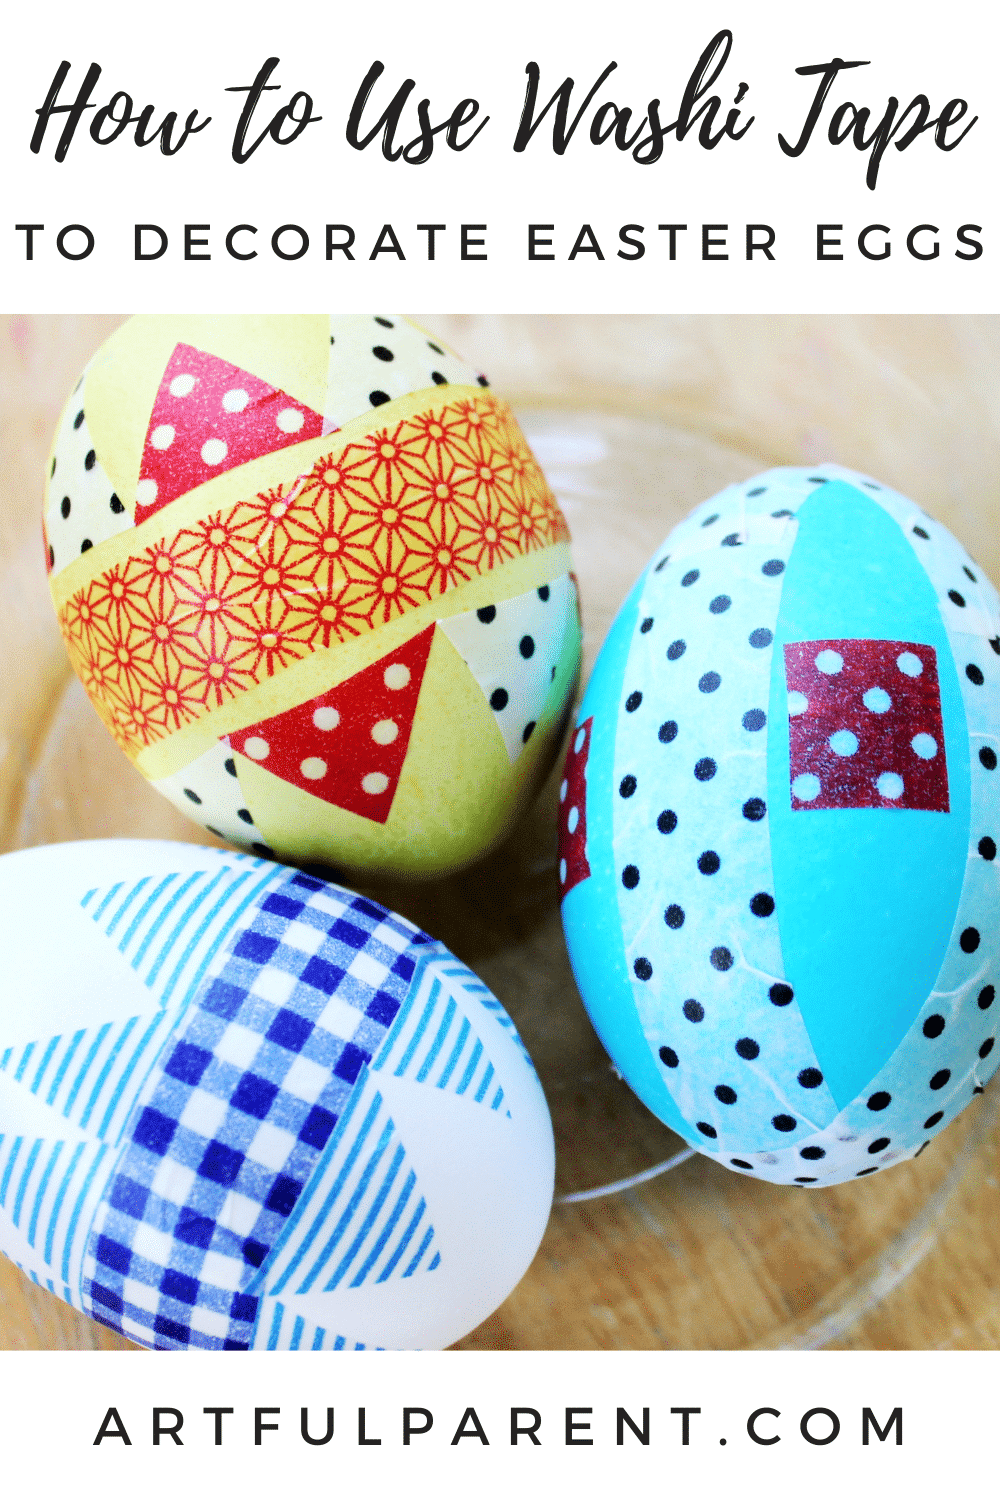 How to Use Washi Tape to Decorate Easter Eggs